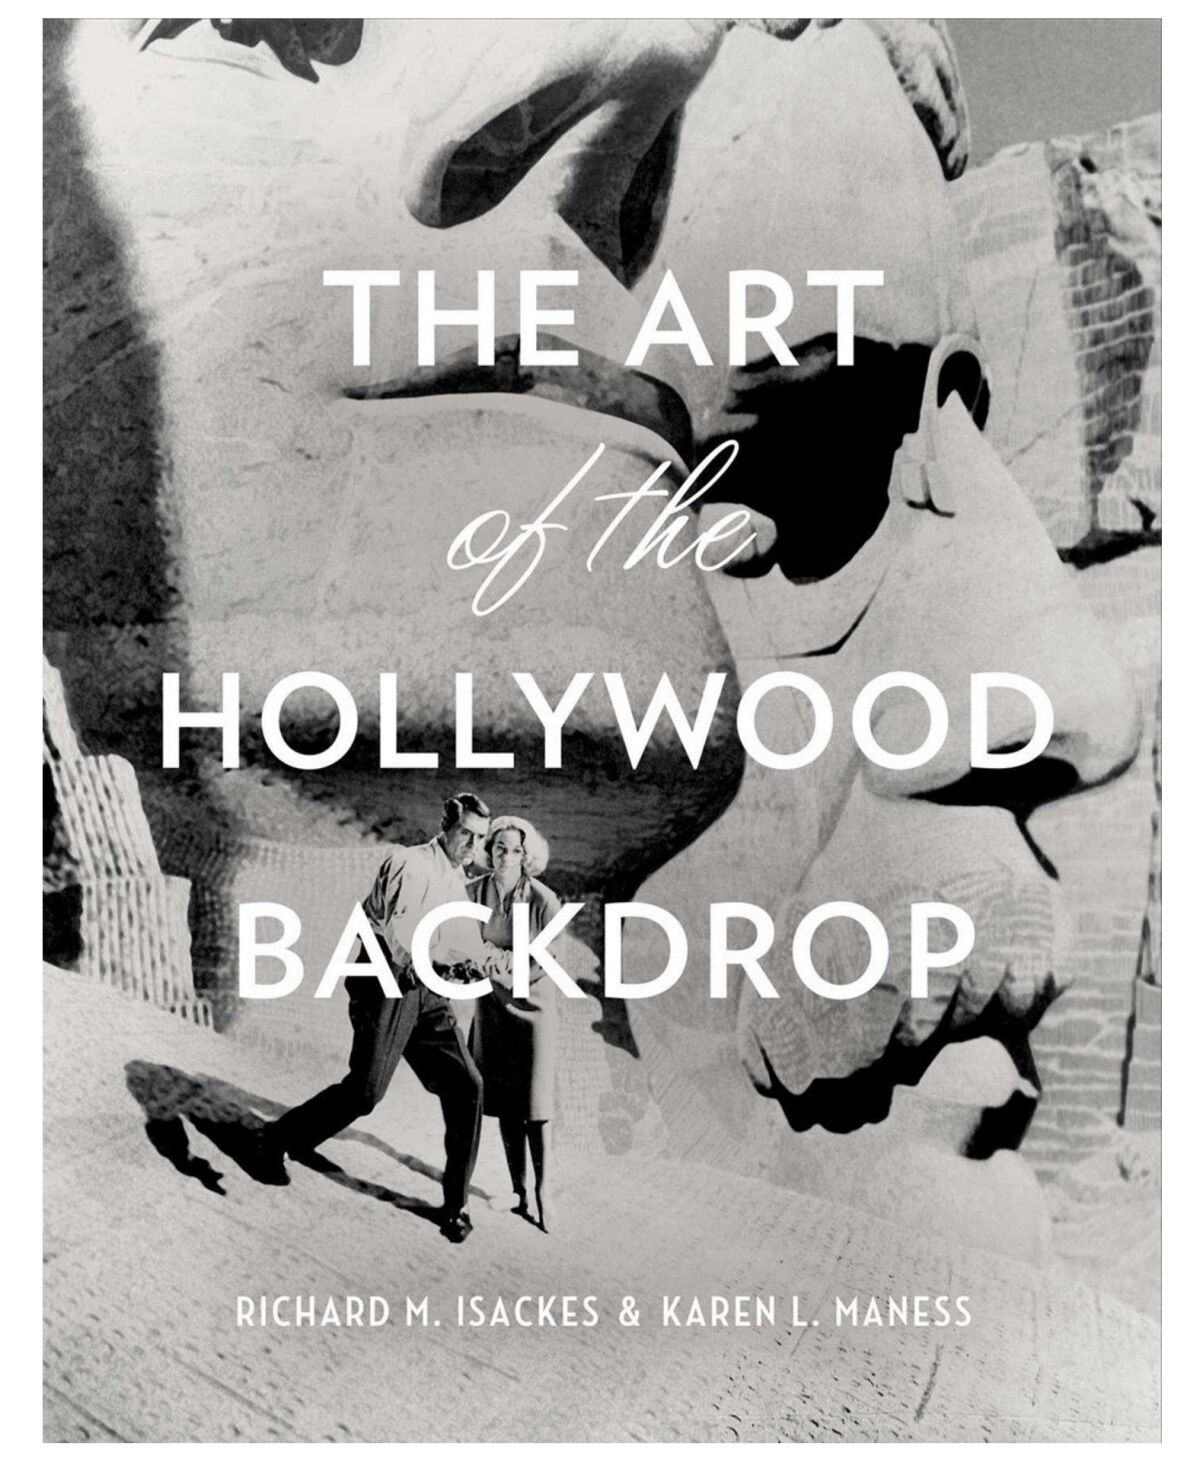 "The Art of the Hollywood Backdrop" by Richard M. Isaacs and Karen L. Maness is published by Regan Arts.